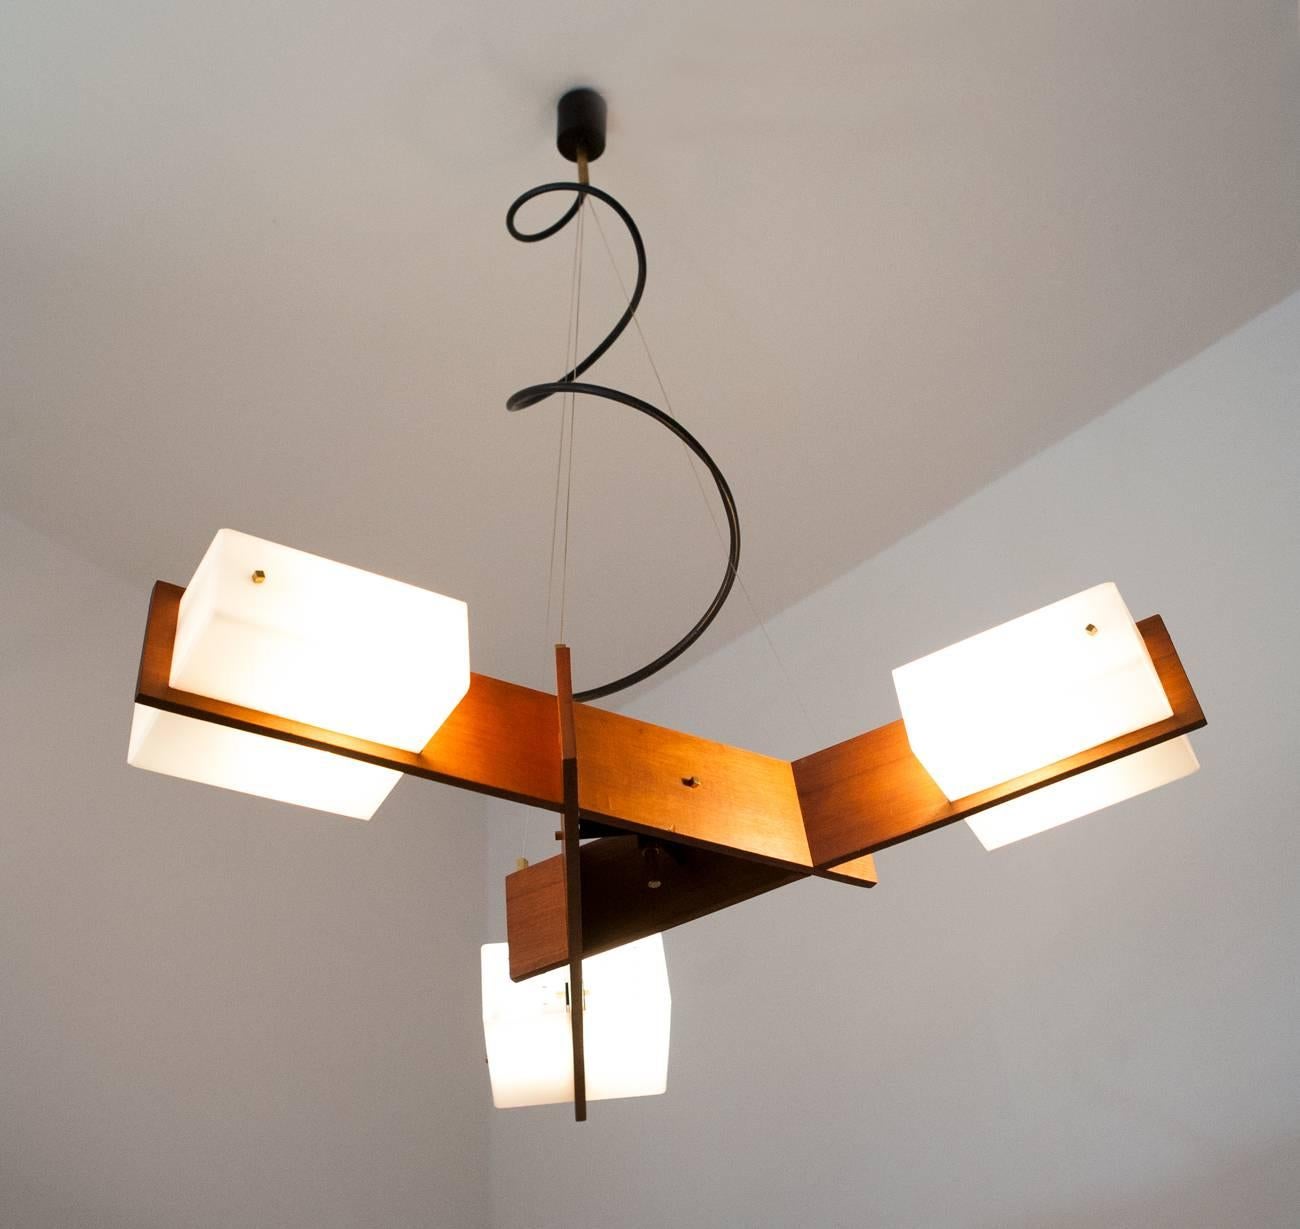 An Italian vintage ceiling light made by Esperia in the 1950s.
Solid teak frame, Plexiglas shades, brass and iron details.
Six standard E14 bulbs.
One of the Plexiglas shades has a little crack in the upper side (not visible when the light is